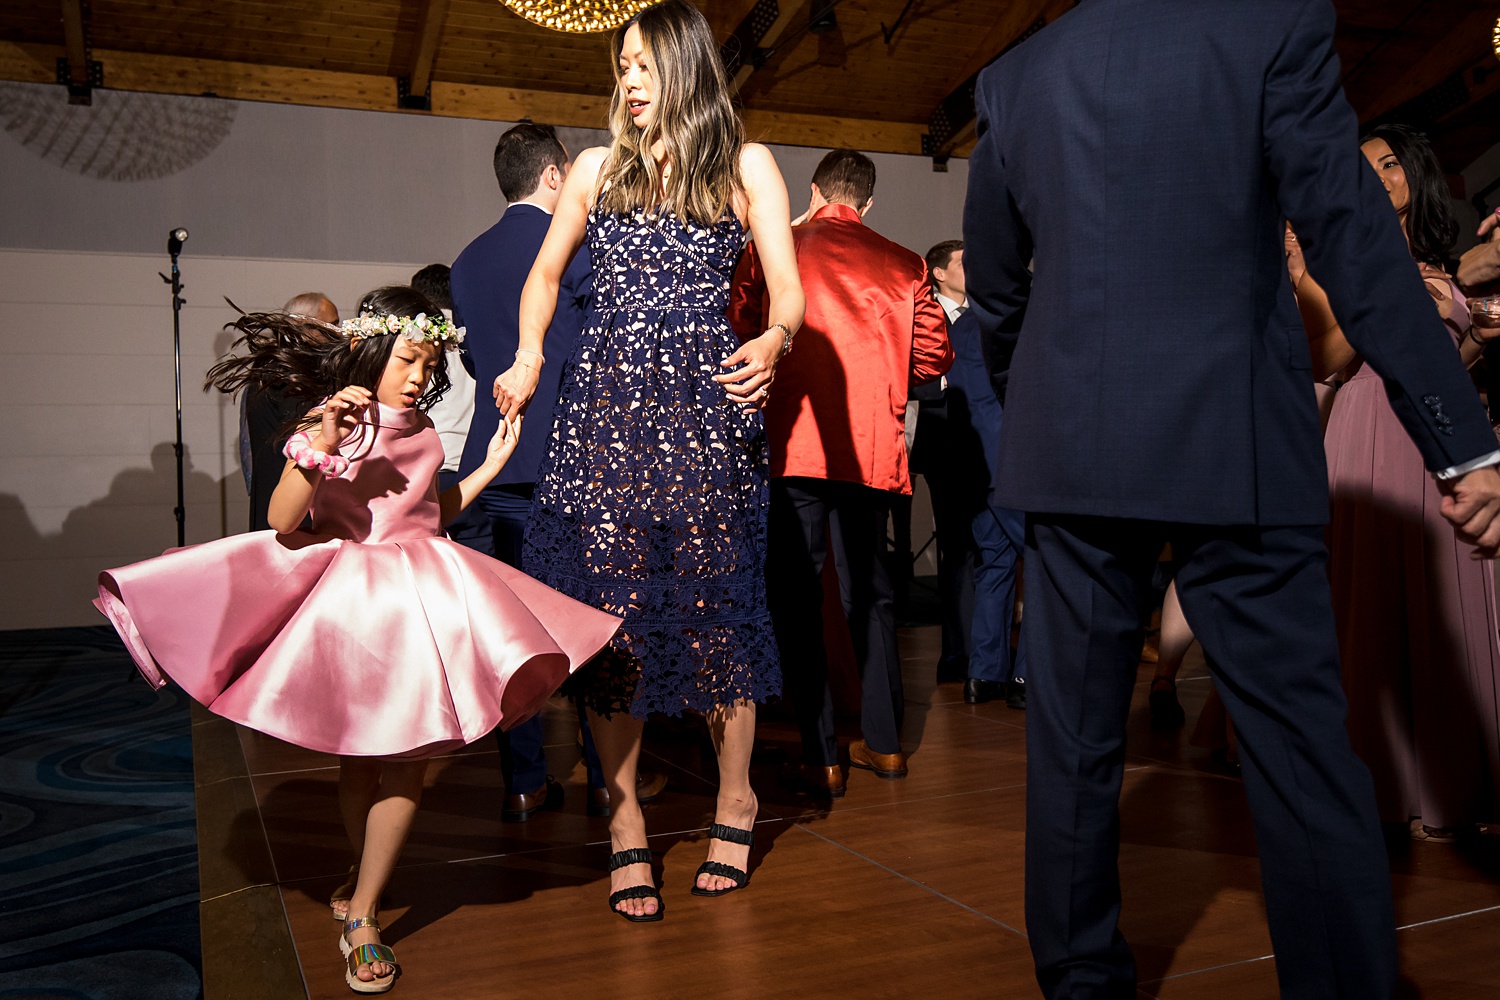 Flower girl dances with her mom at the wedding reception